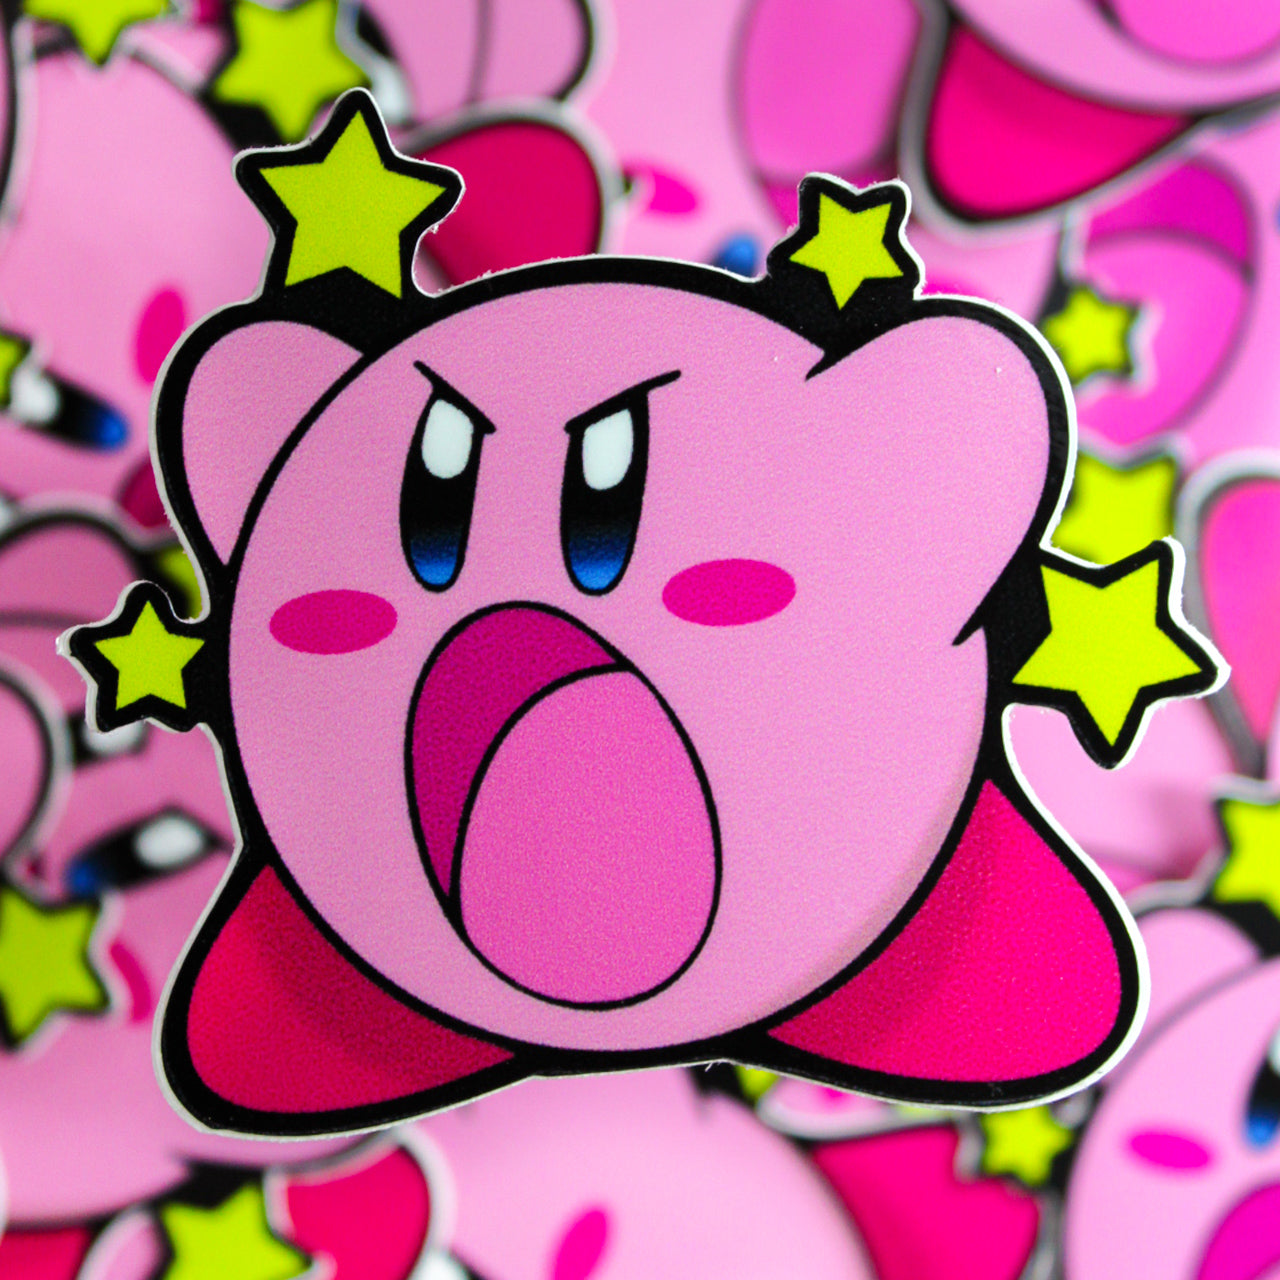 Pink Kirby sticker with yellow stars in background